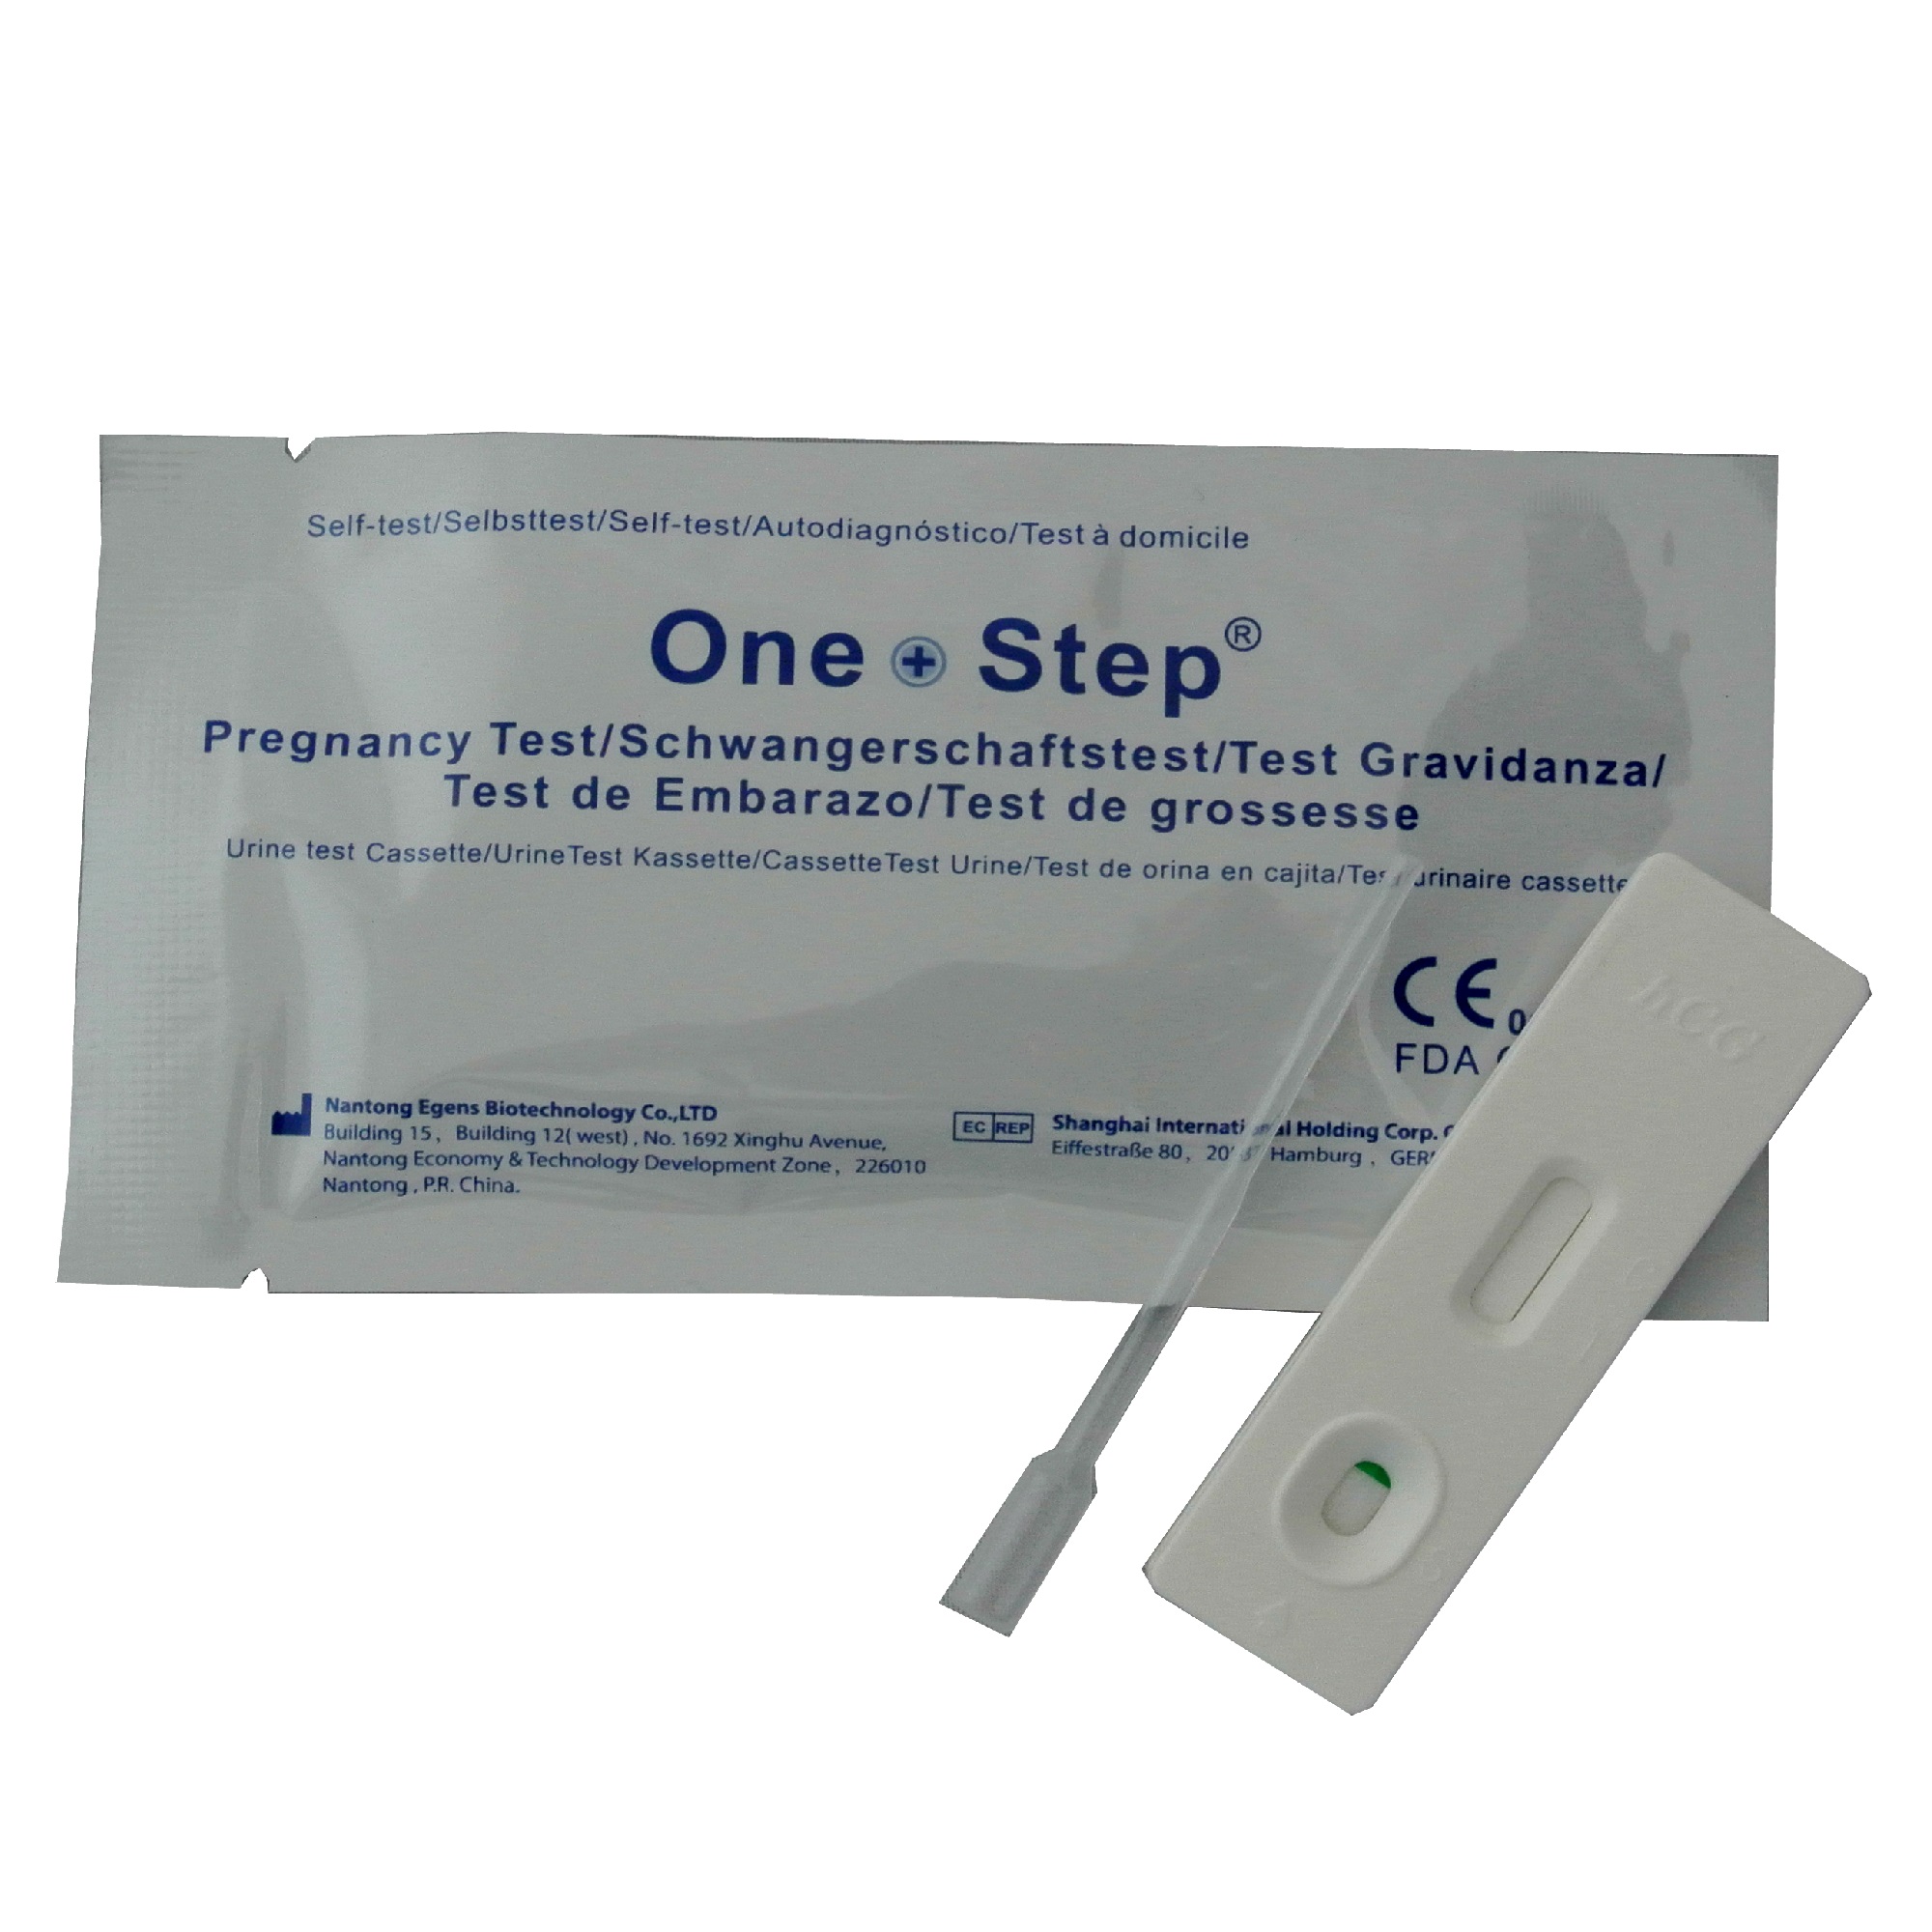 David One Step Cassette Pregnancy Test, Box of 40 or Single Test, Individually packaged, Result within 5 minutes, These units detect HCG at the FDA standard, which is 25 mIU/mL.